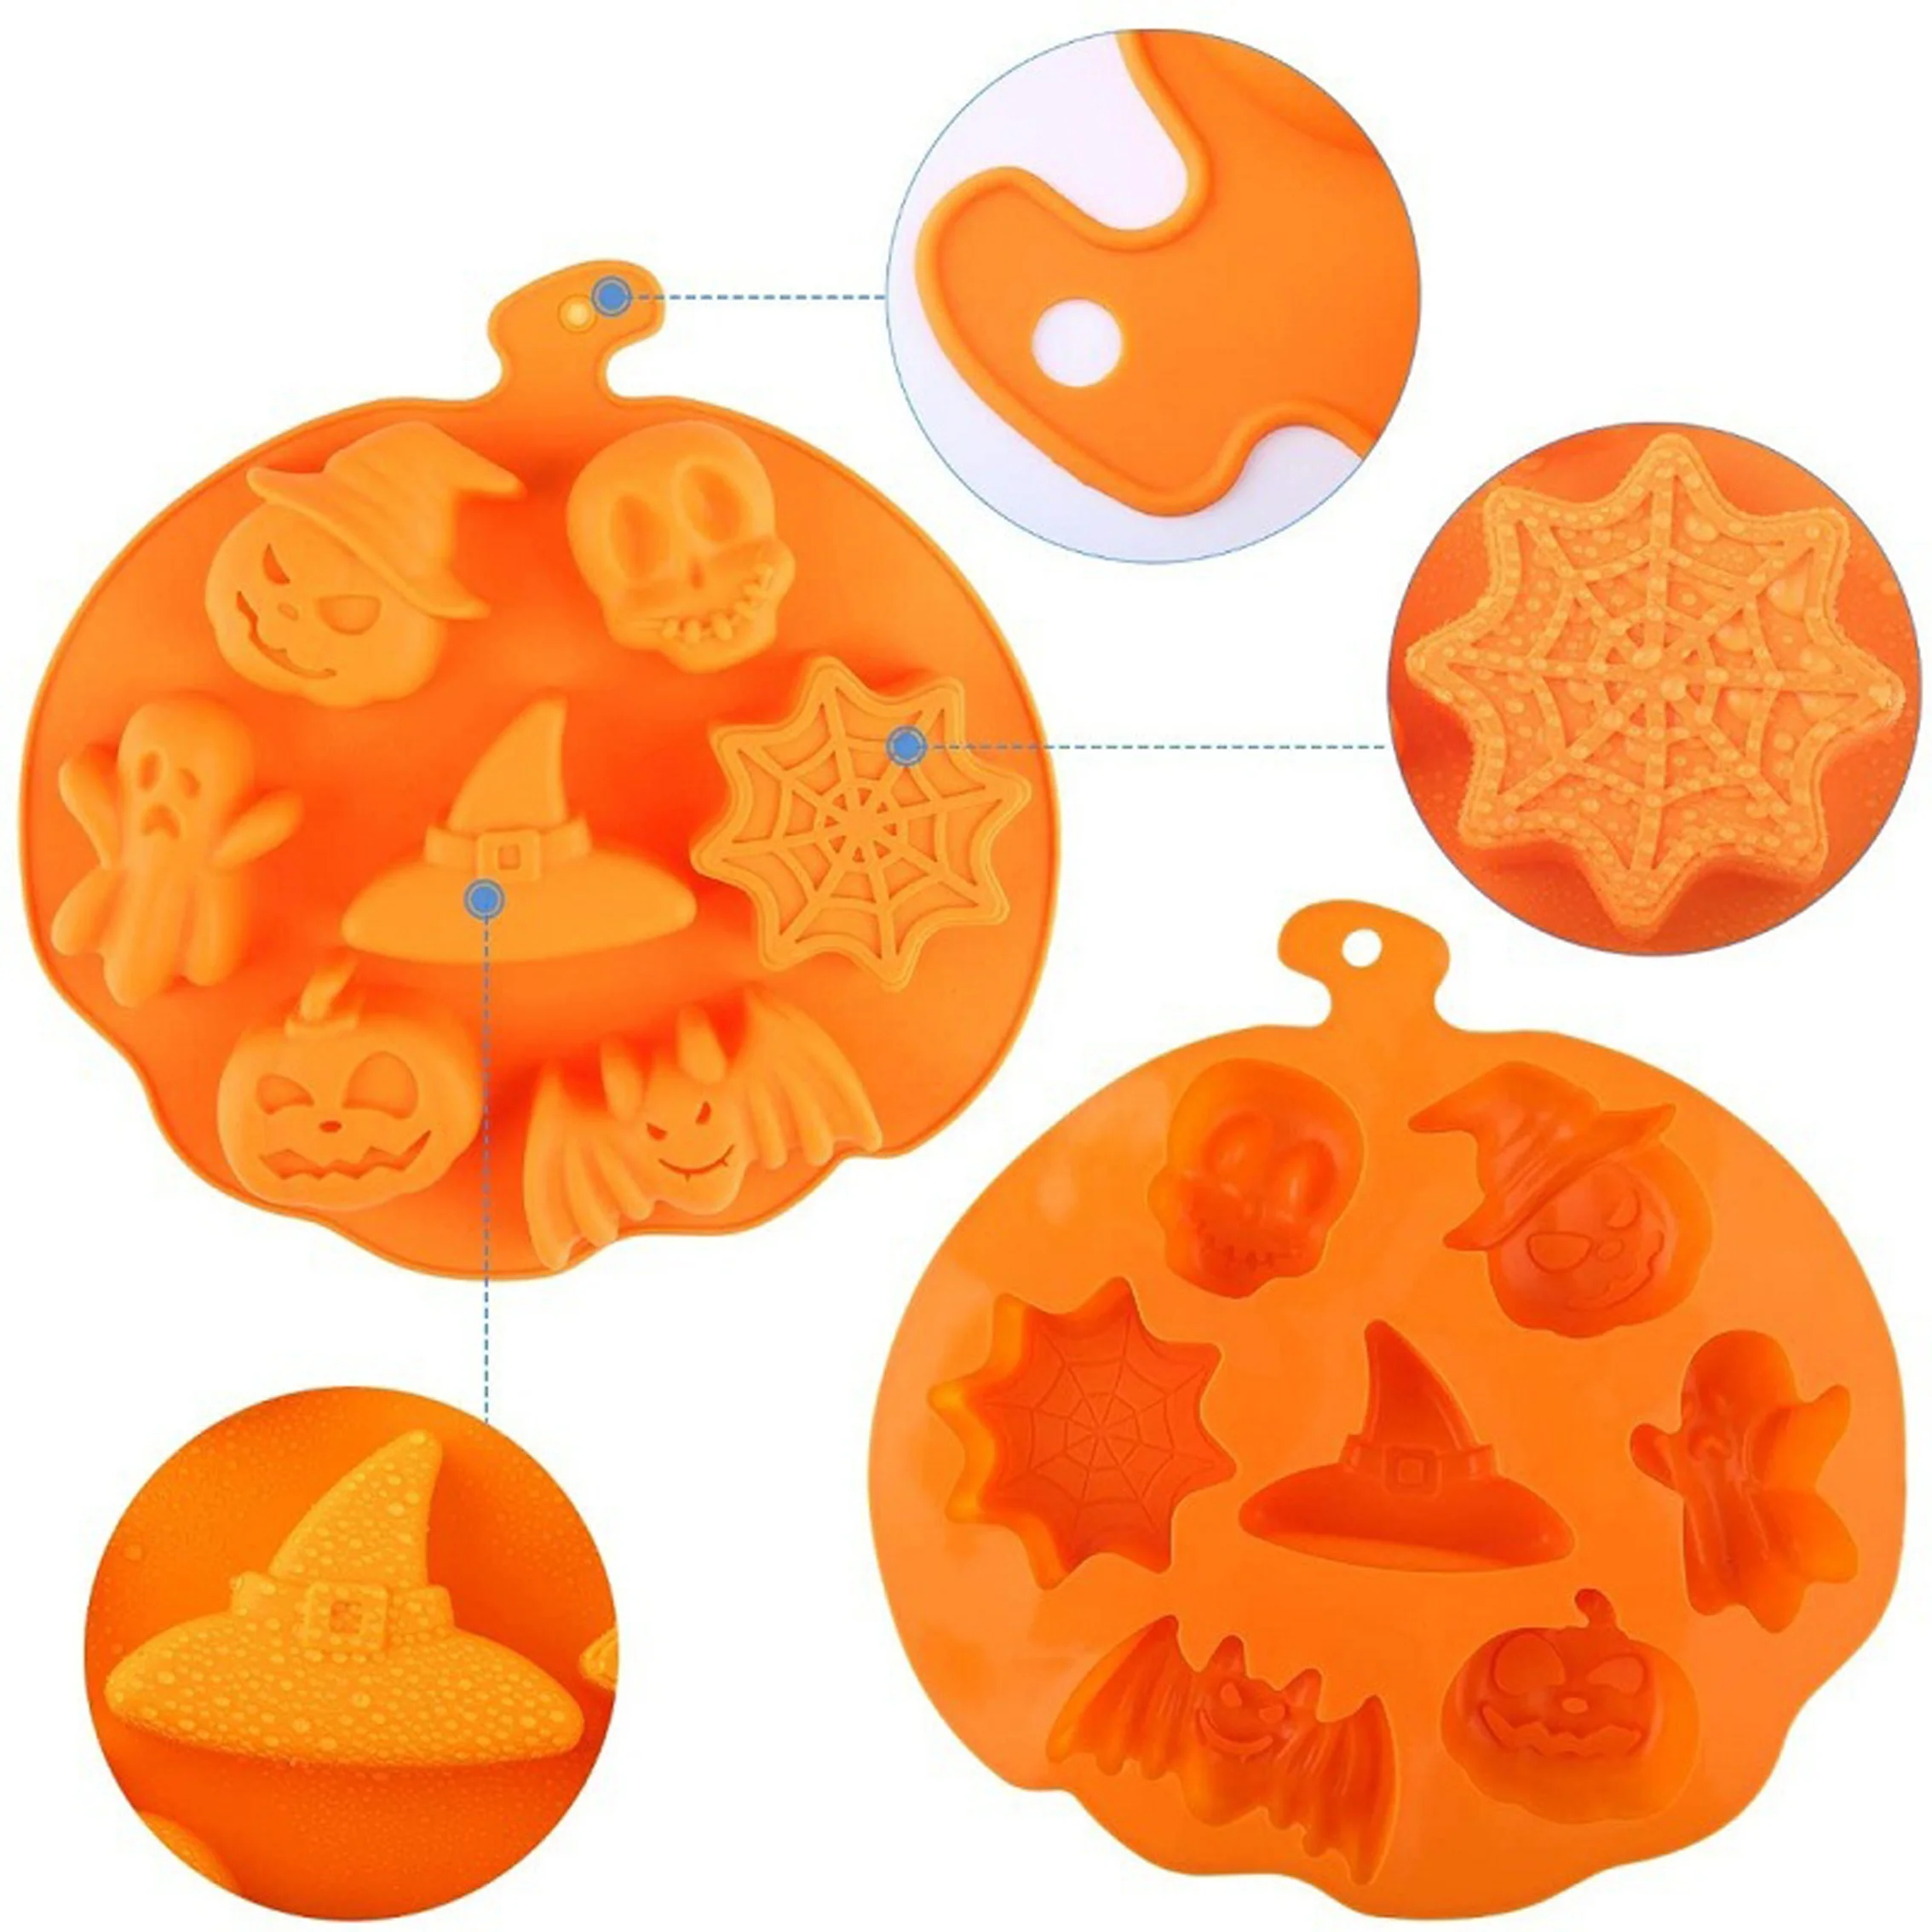 Hot Selling Halloween Pastry Fondant Chocolate Pumpkin Ghost Cake Silicone Moulds Soap Candle Making Mold Baking Tools